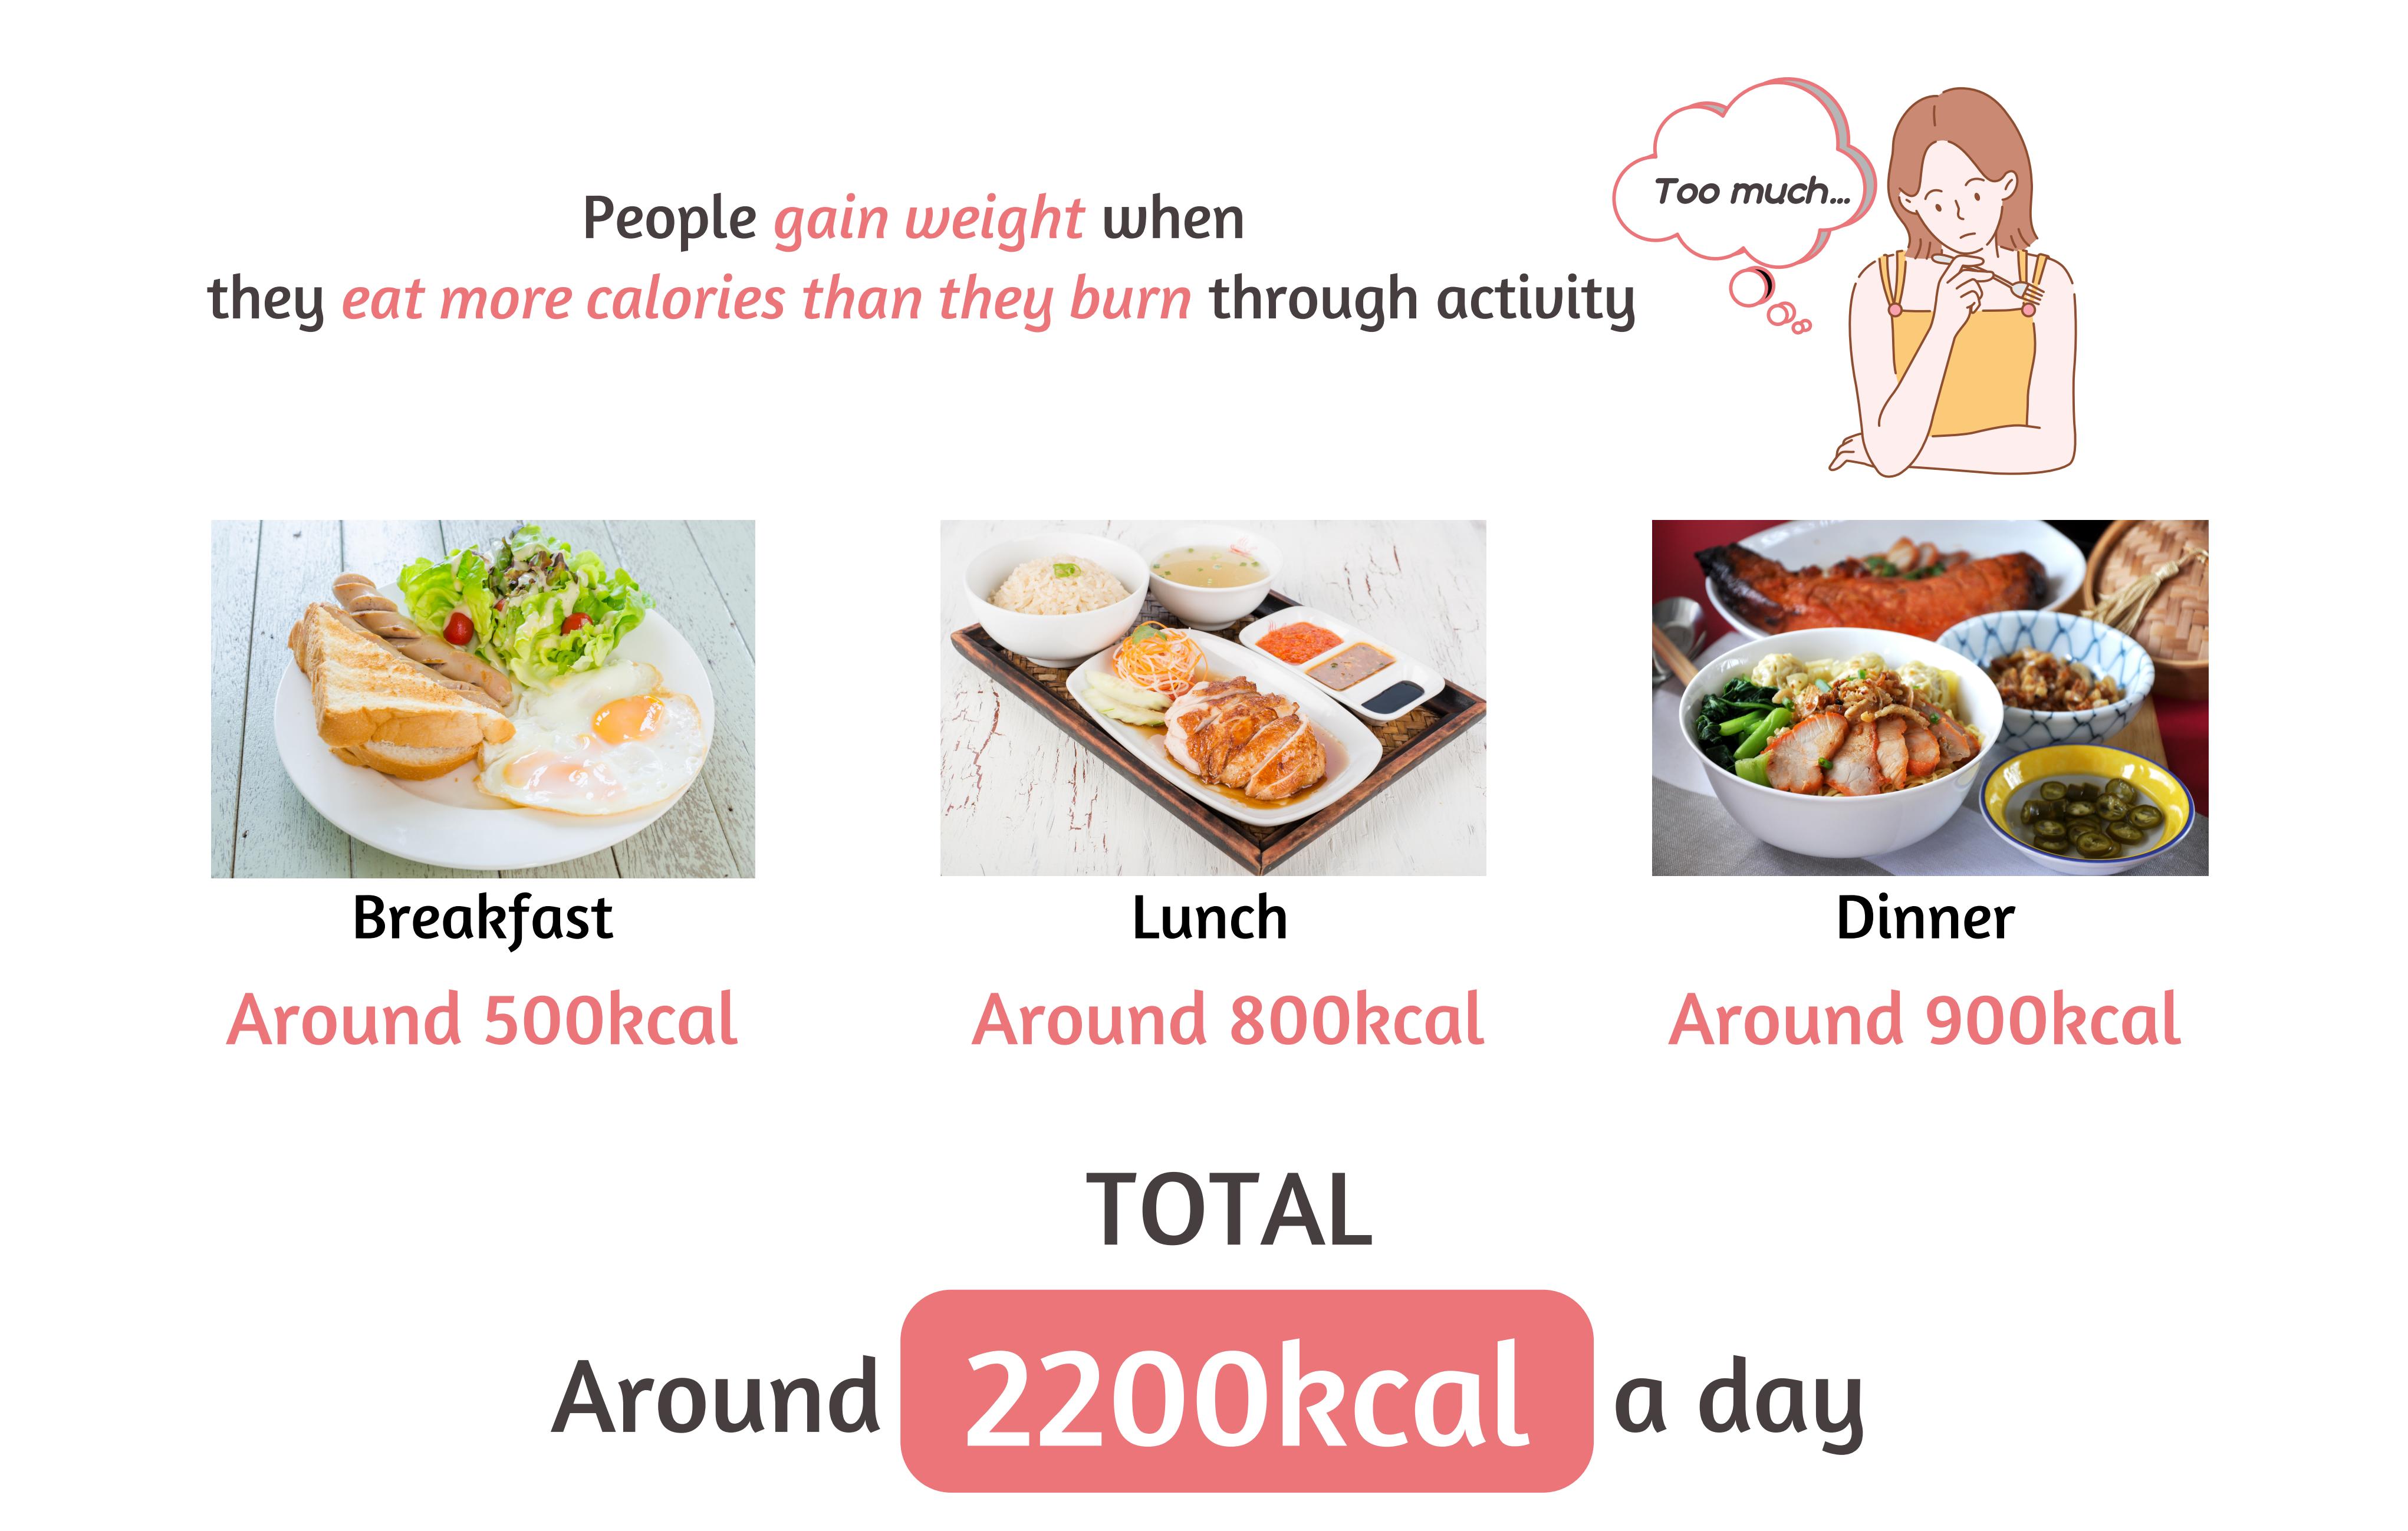 TOTAL Around 2200kcal a day